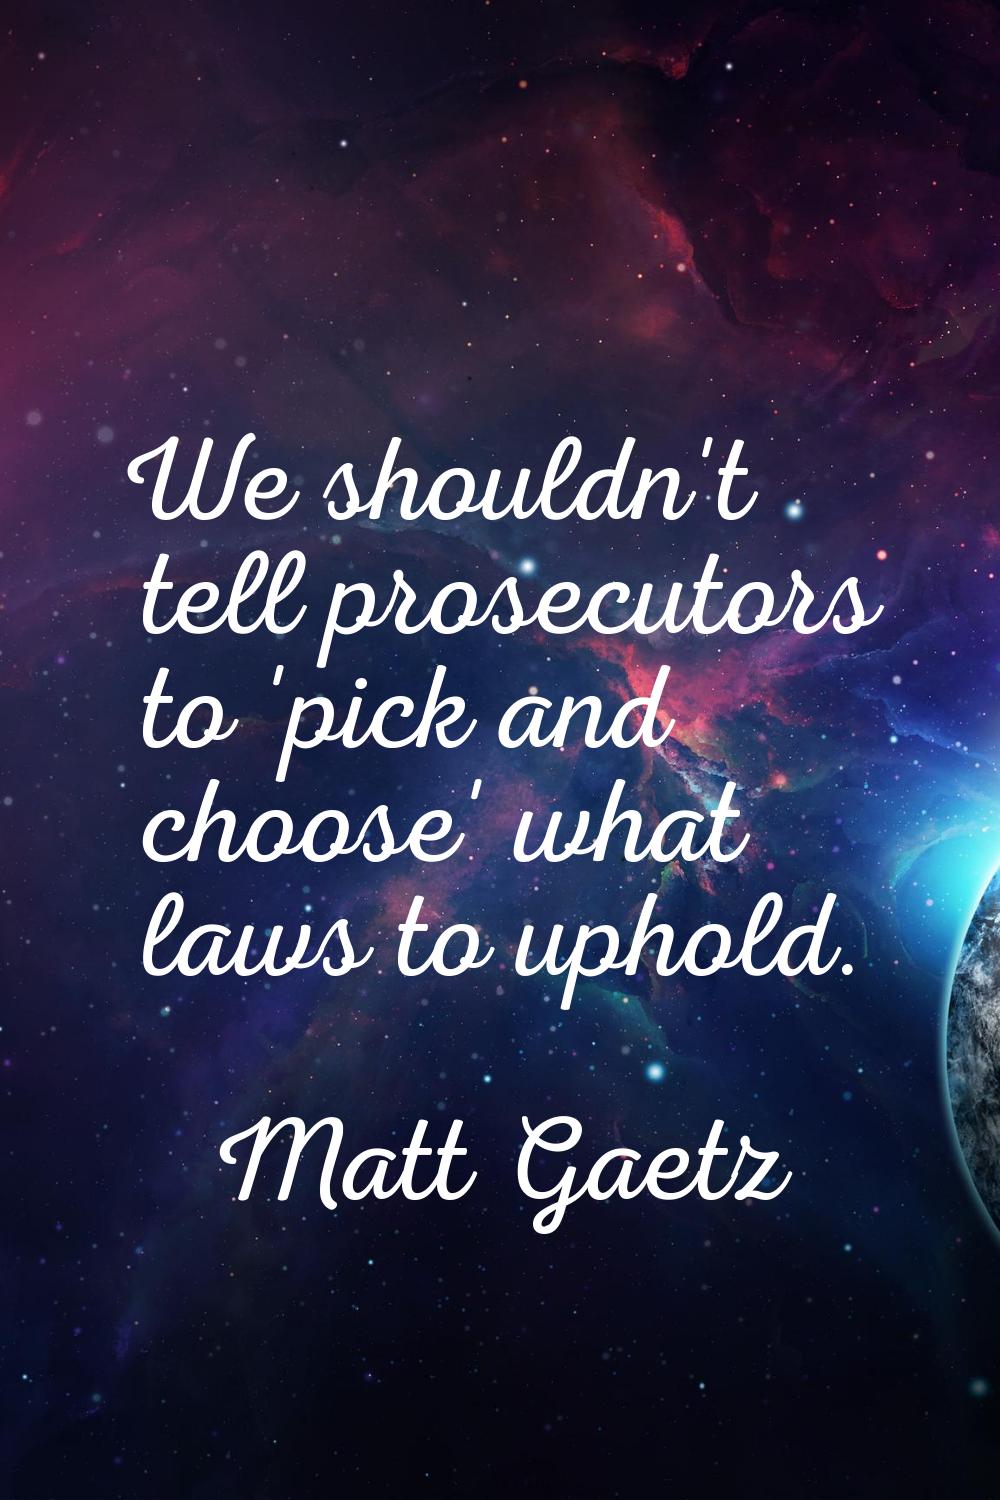 We shouldn't tell prosecutors to 'pick and choose' what laws to uphold.